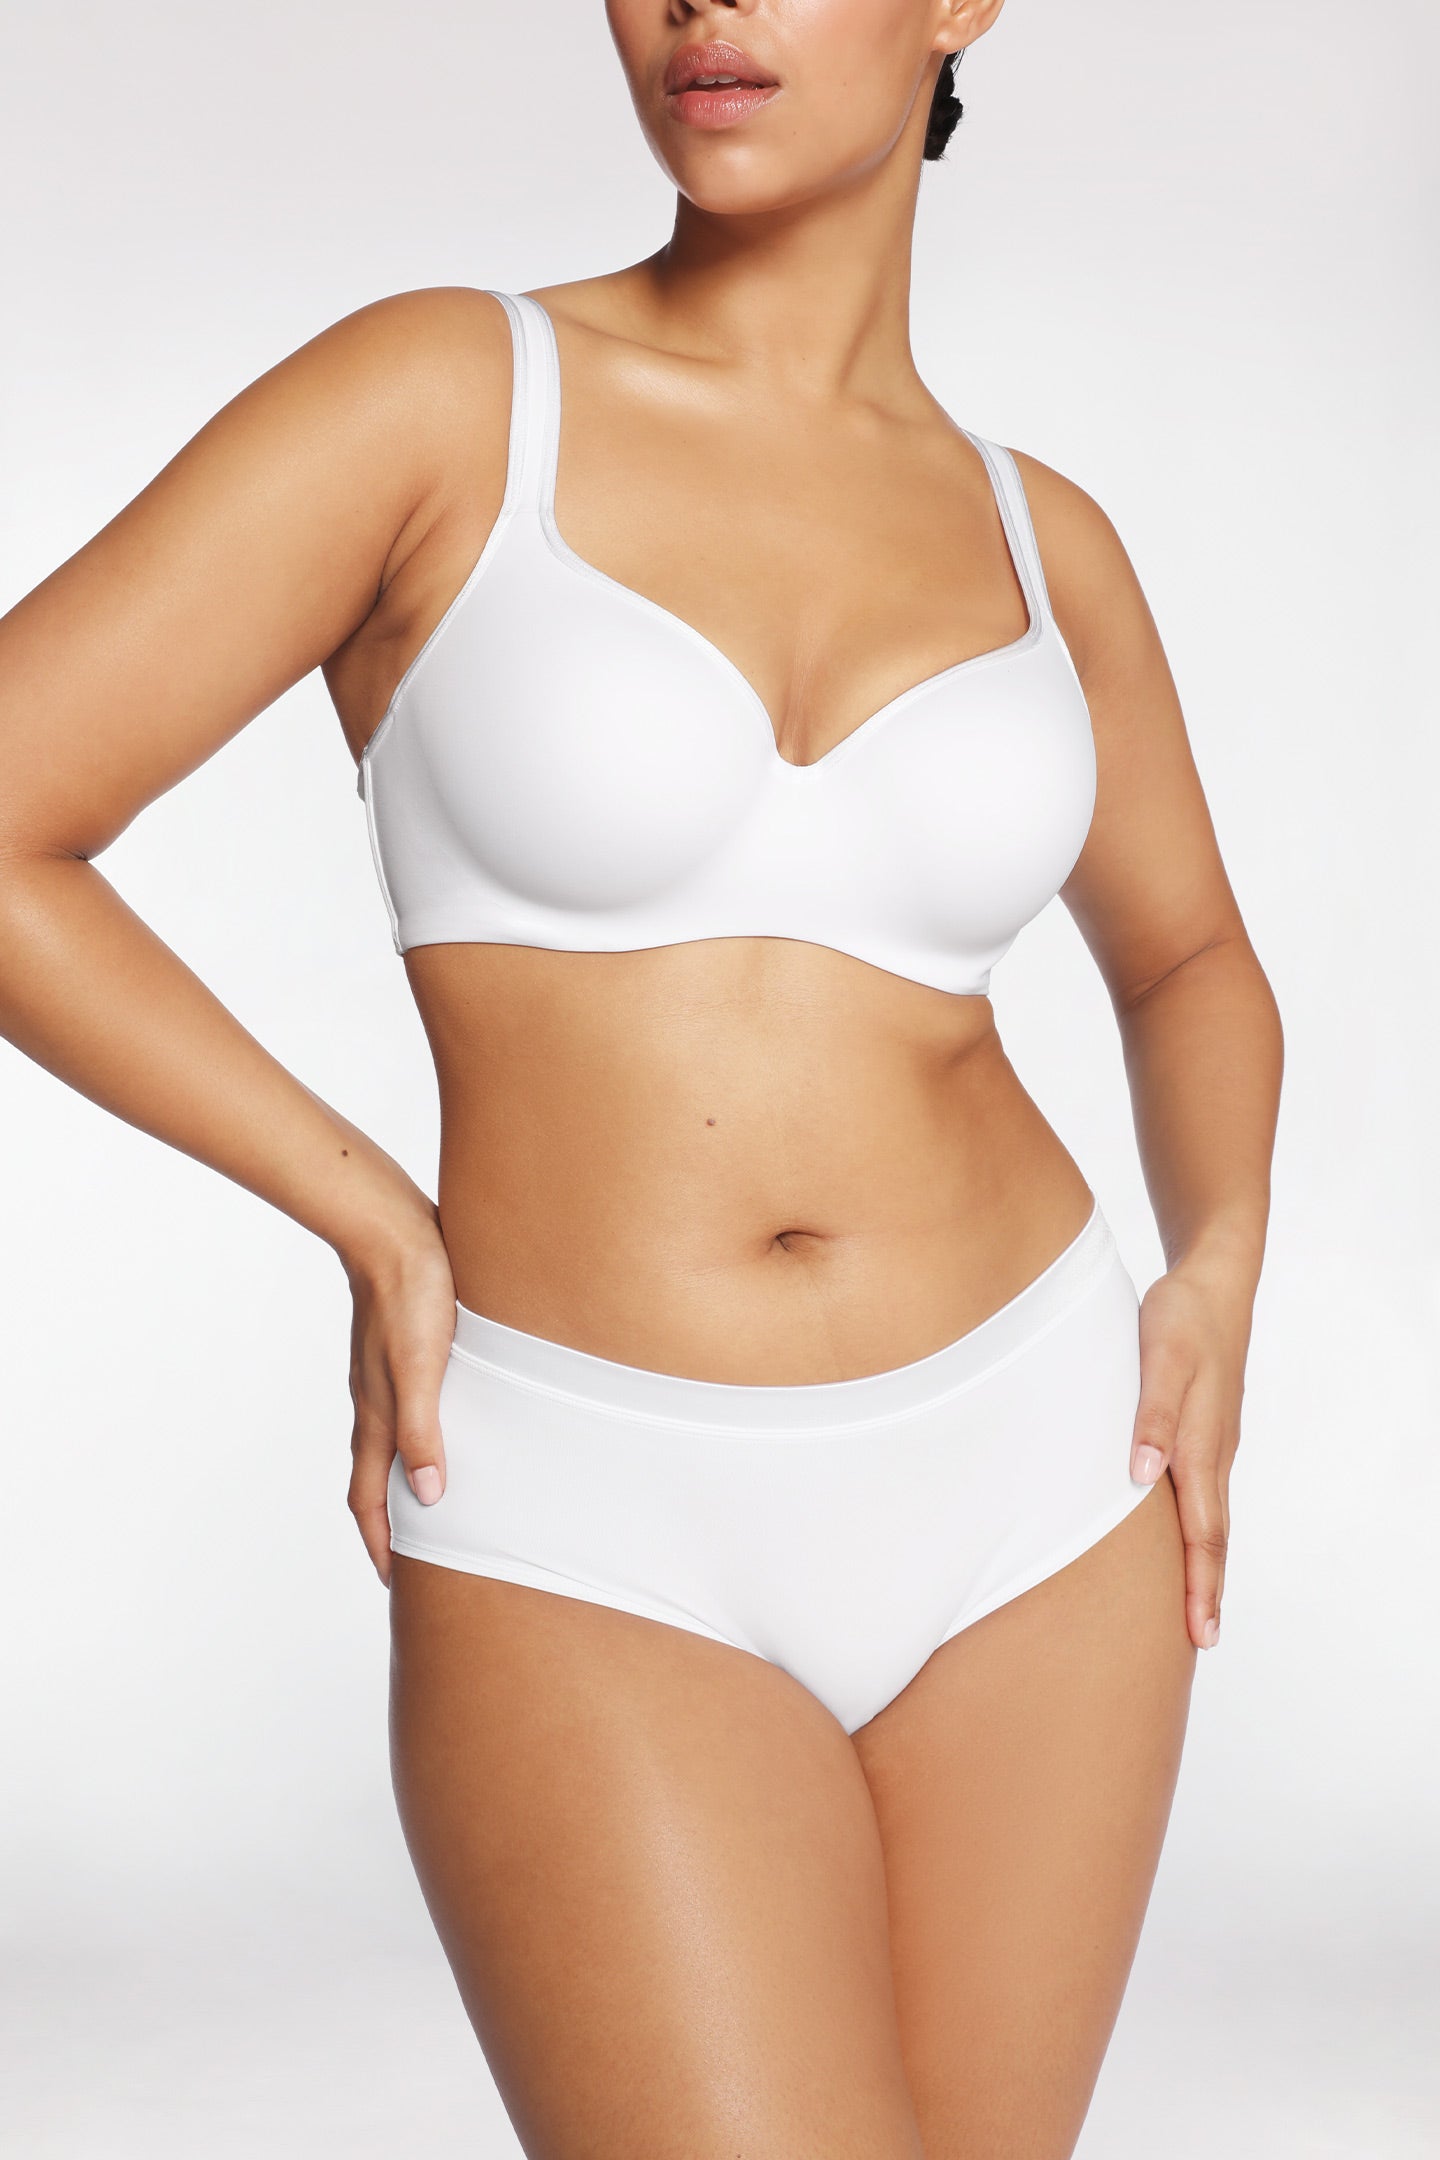 Buy EVERYDAY MIRACLE T SHIRT BRA online at Intimo